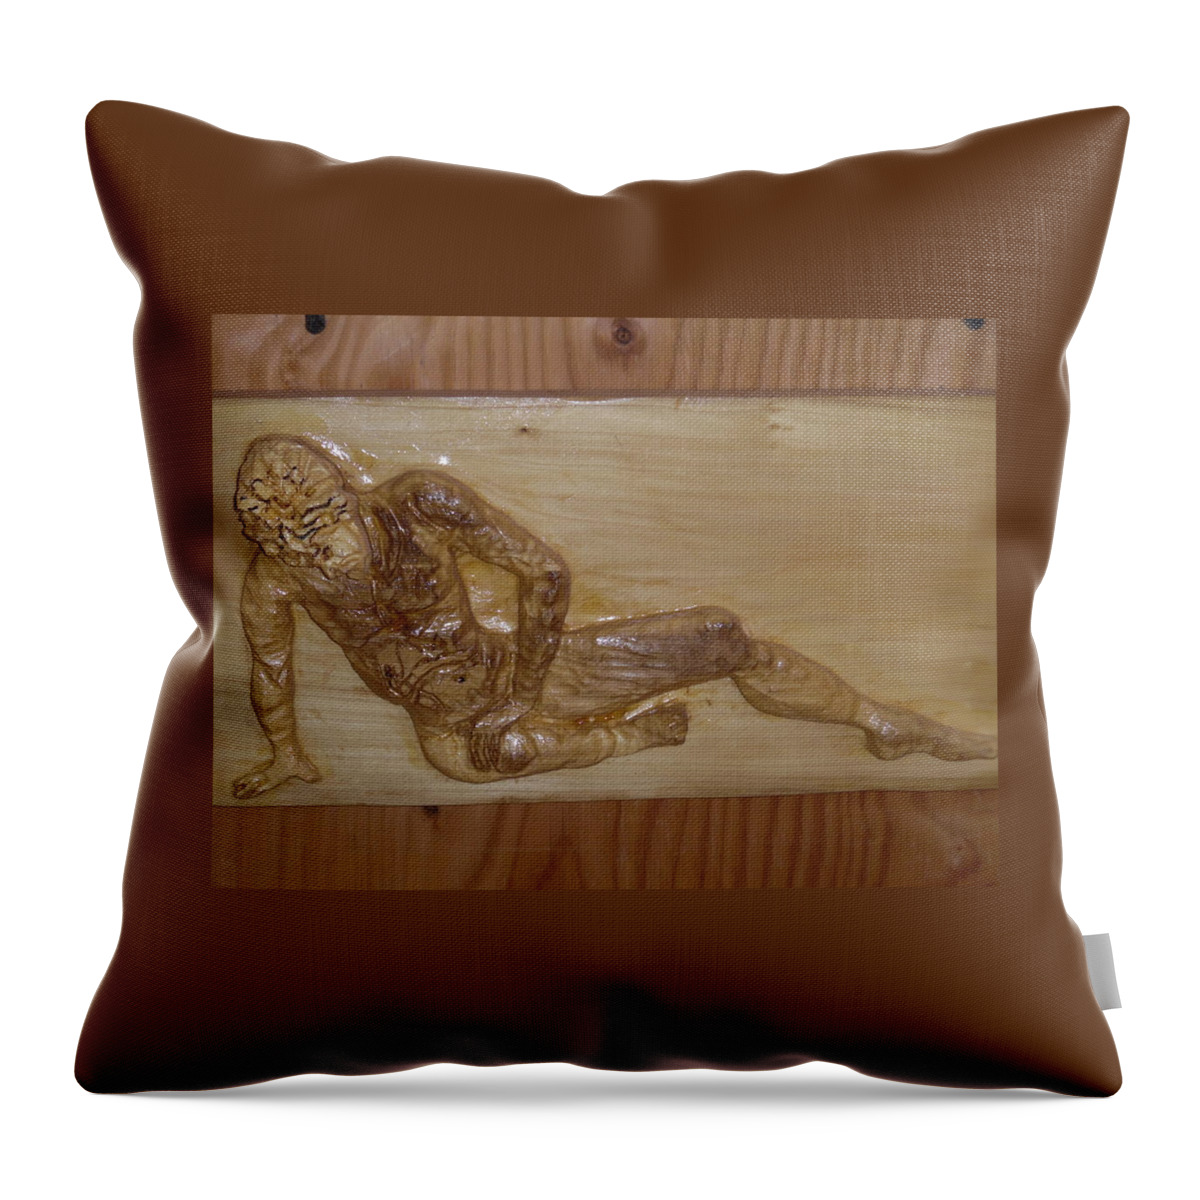 The Fallen Soldier Throw Pillow featuring the sculpture The Fallen Soldier by Esther Newman-Cohen